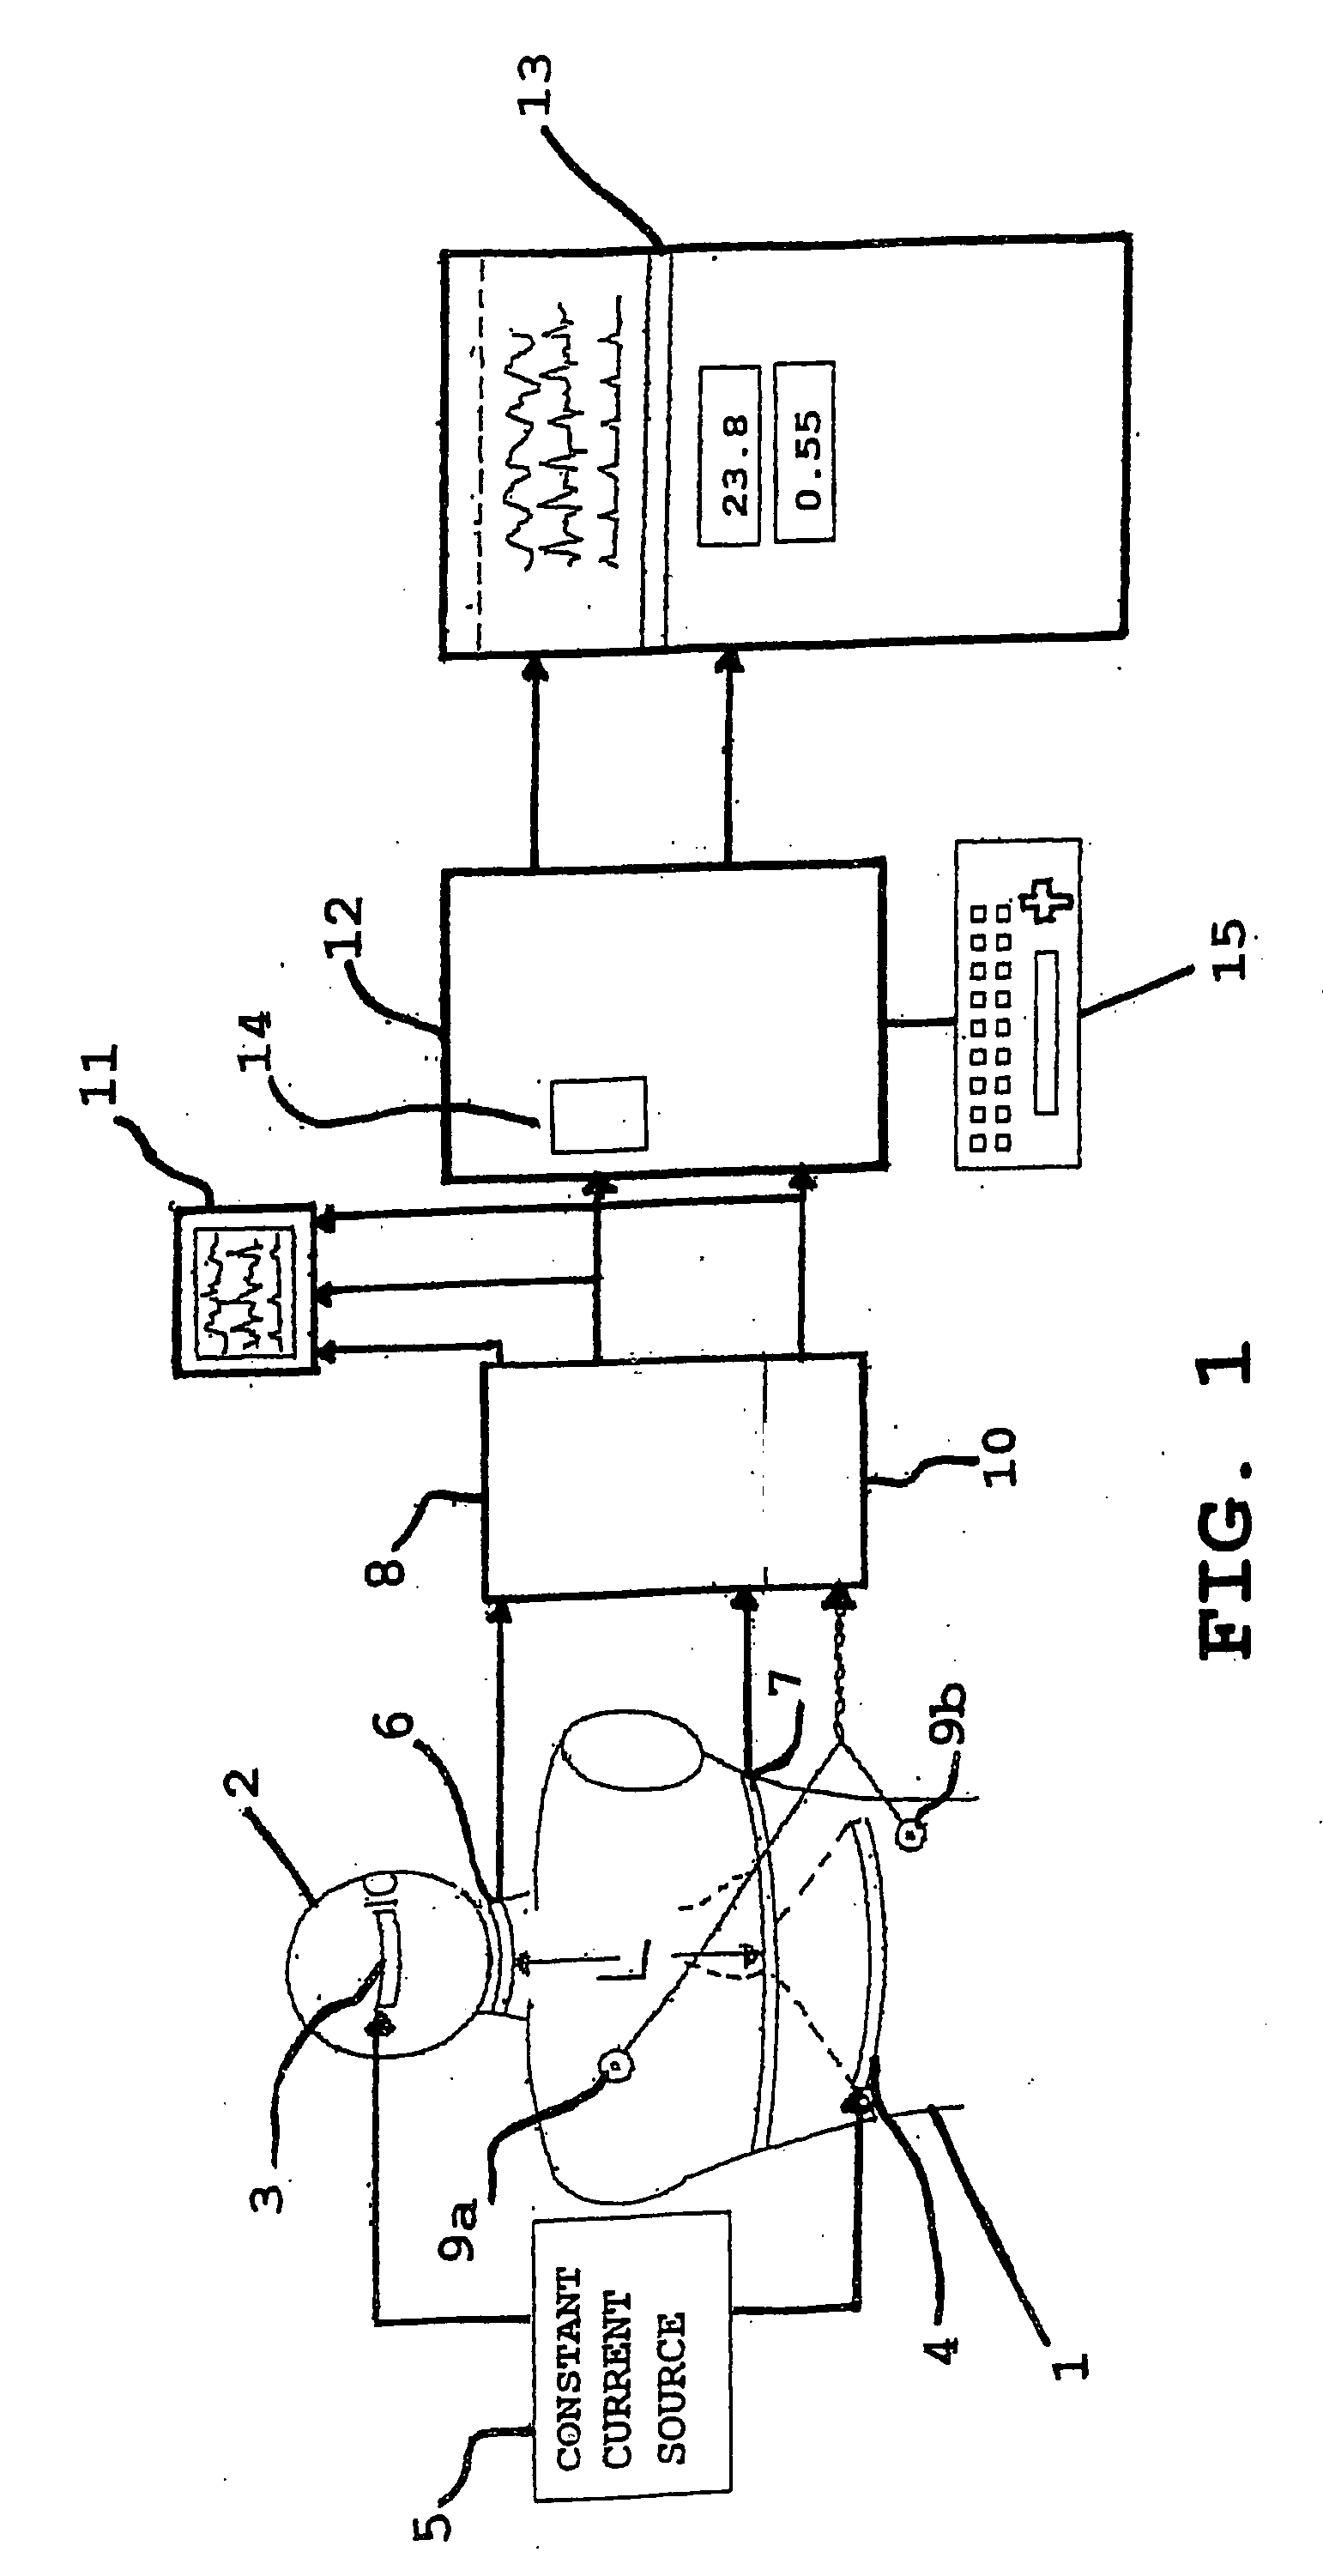 Device and method for measuring cardiac function